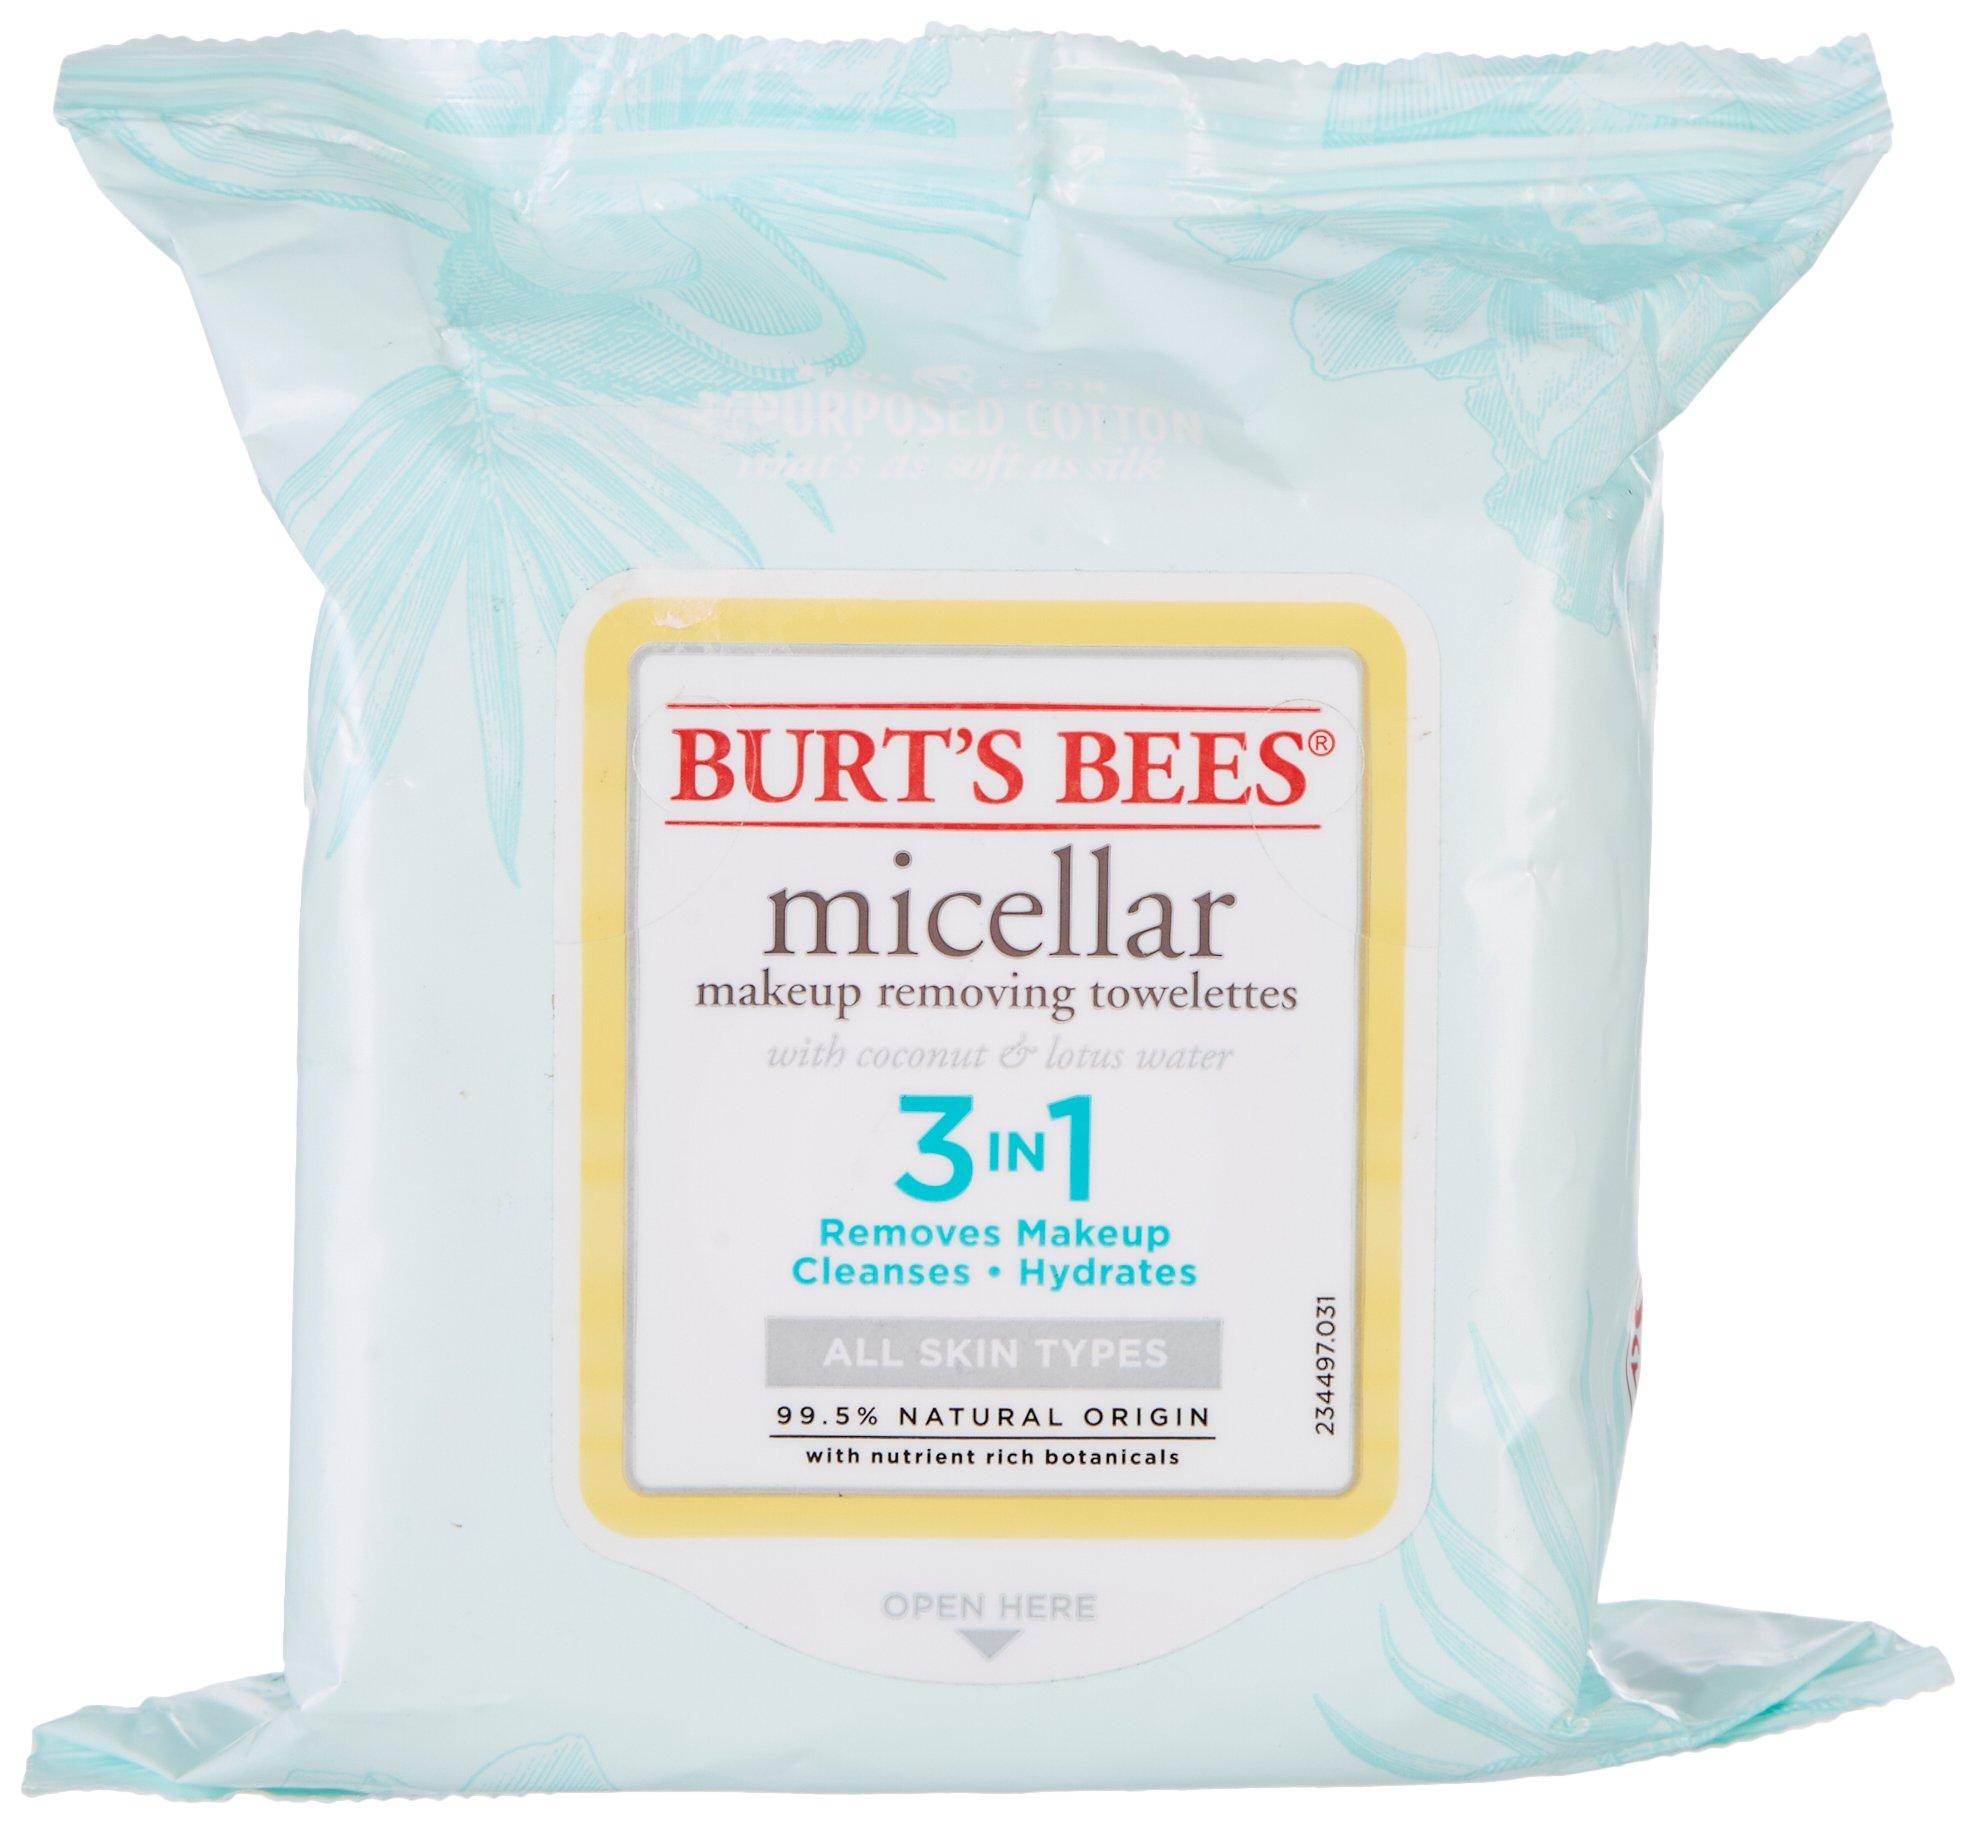 Burt's Bees Micellar 3-in-1 Facial Cleansing Towlettes